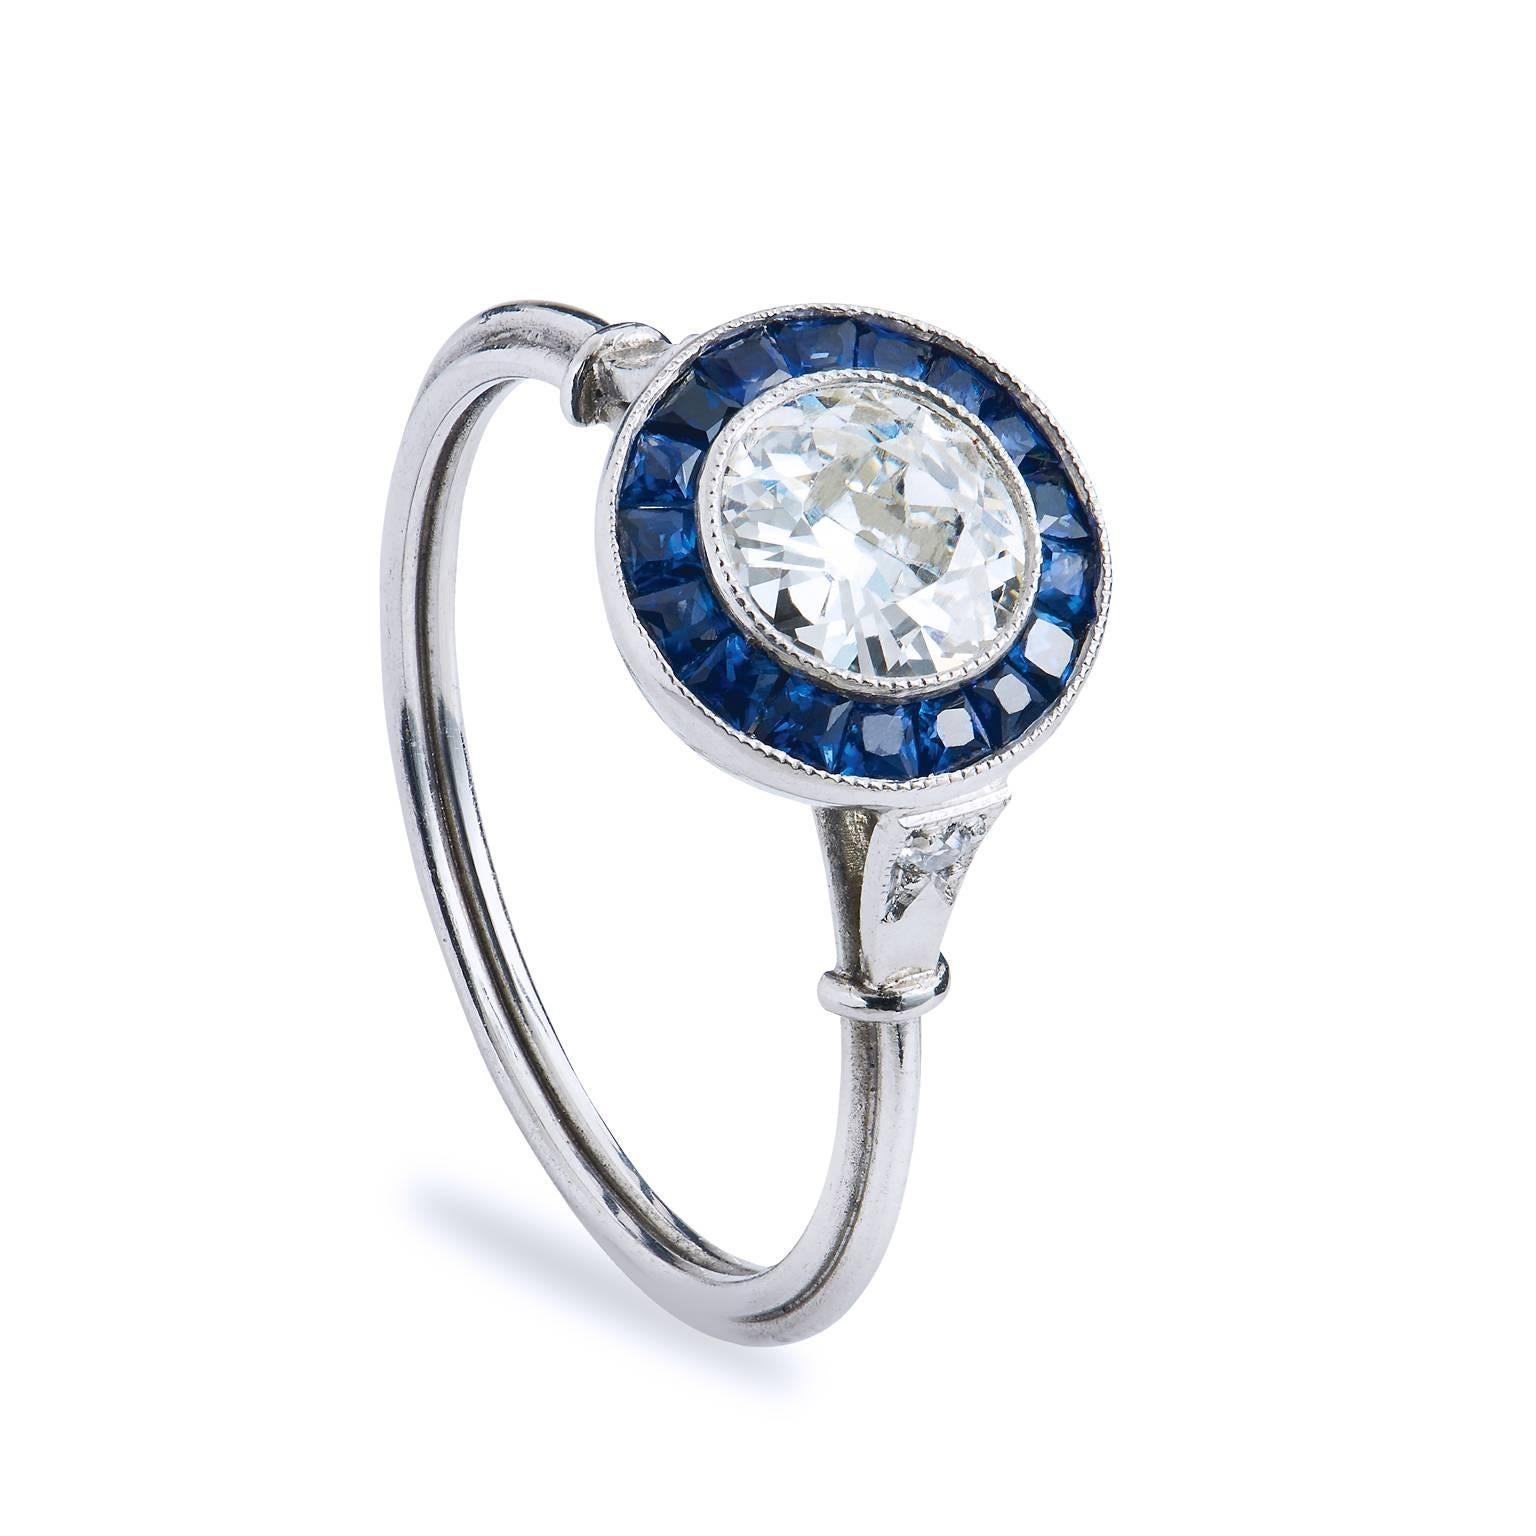 Crafted in platinum, this ring features a .66ct H/I VS graded old European cut center diamond surrounded by .70ct of caliber cut channel set sapphires. The ring features a thin shank for a very soft and feminine feel that is set with pave diamonds. 